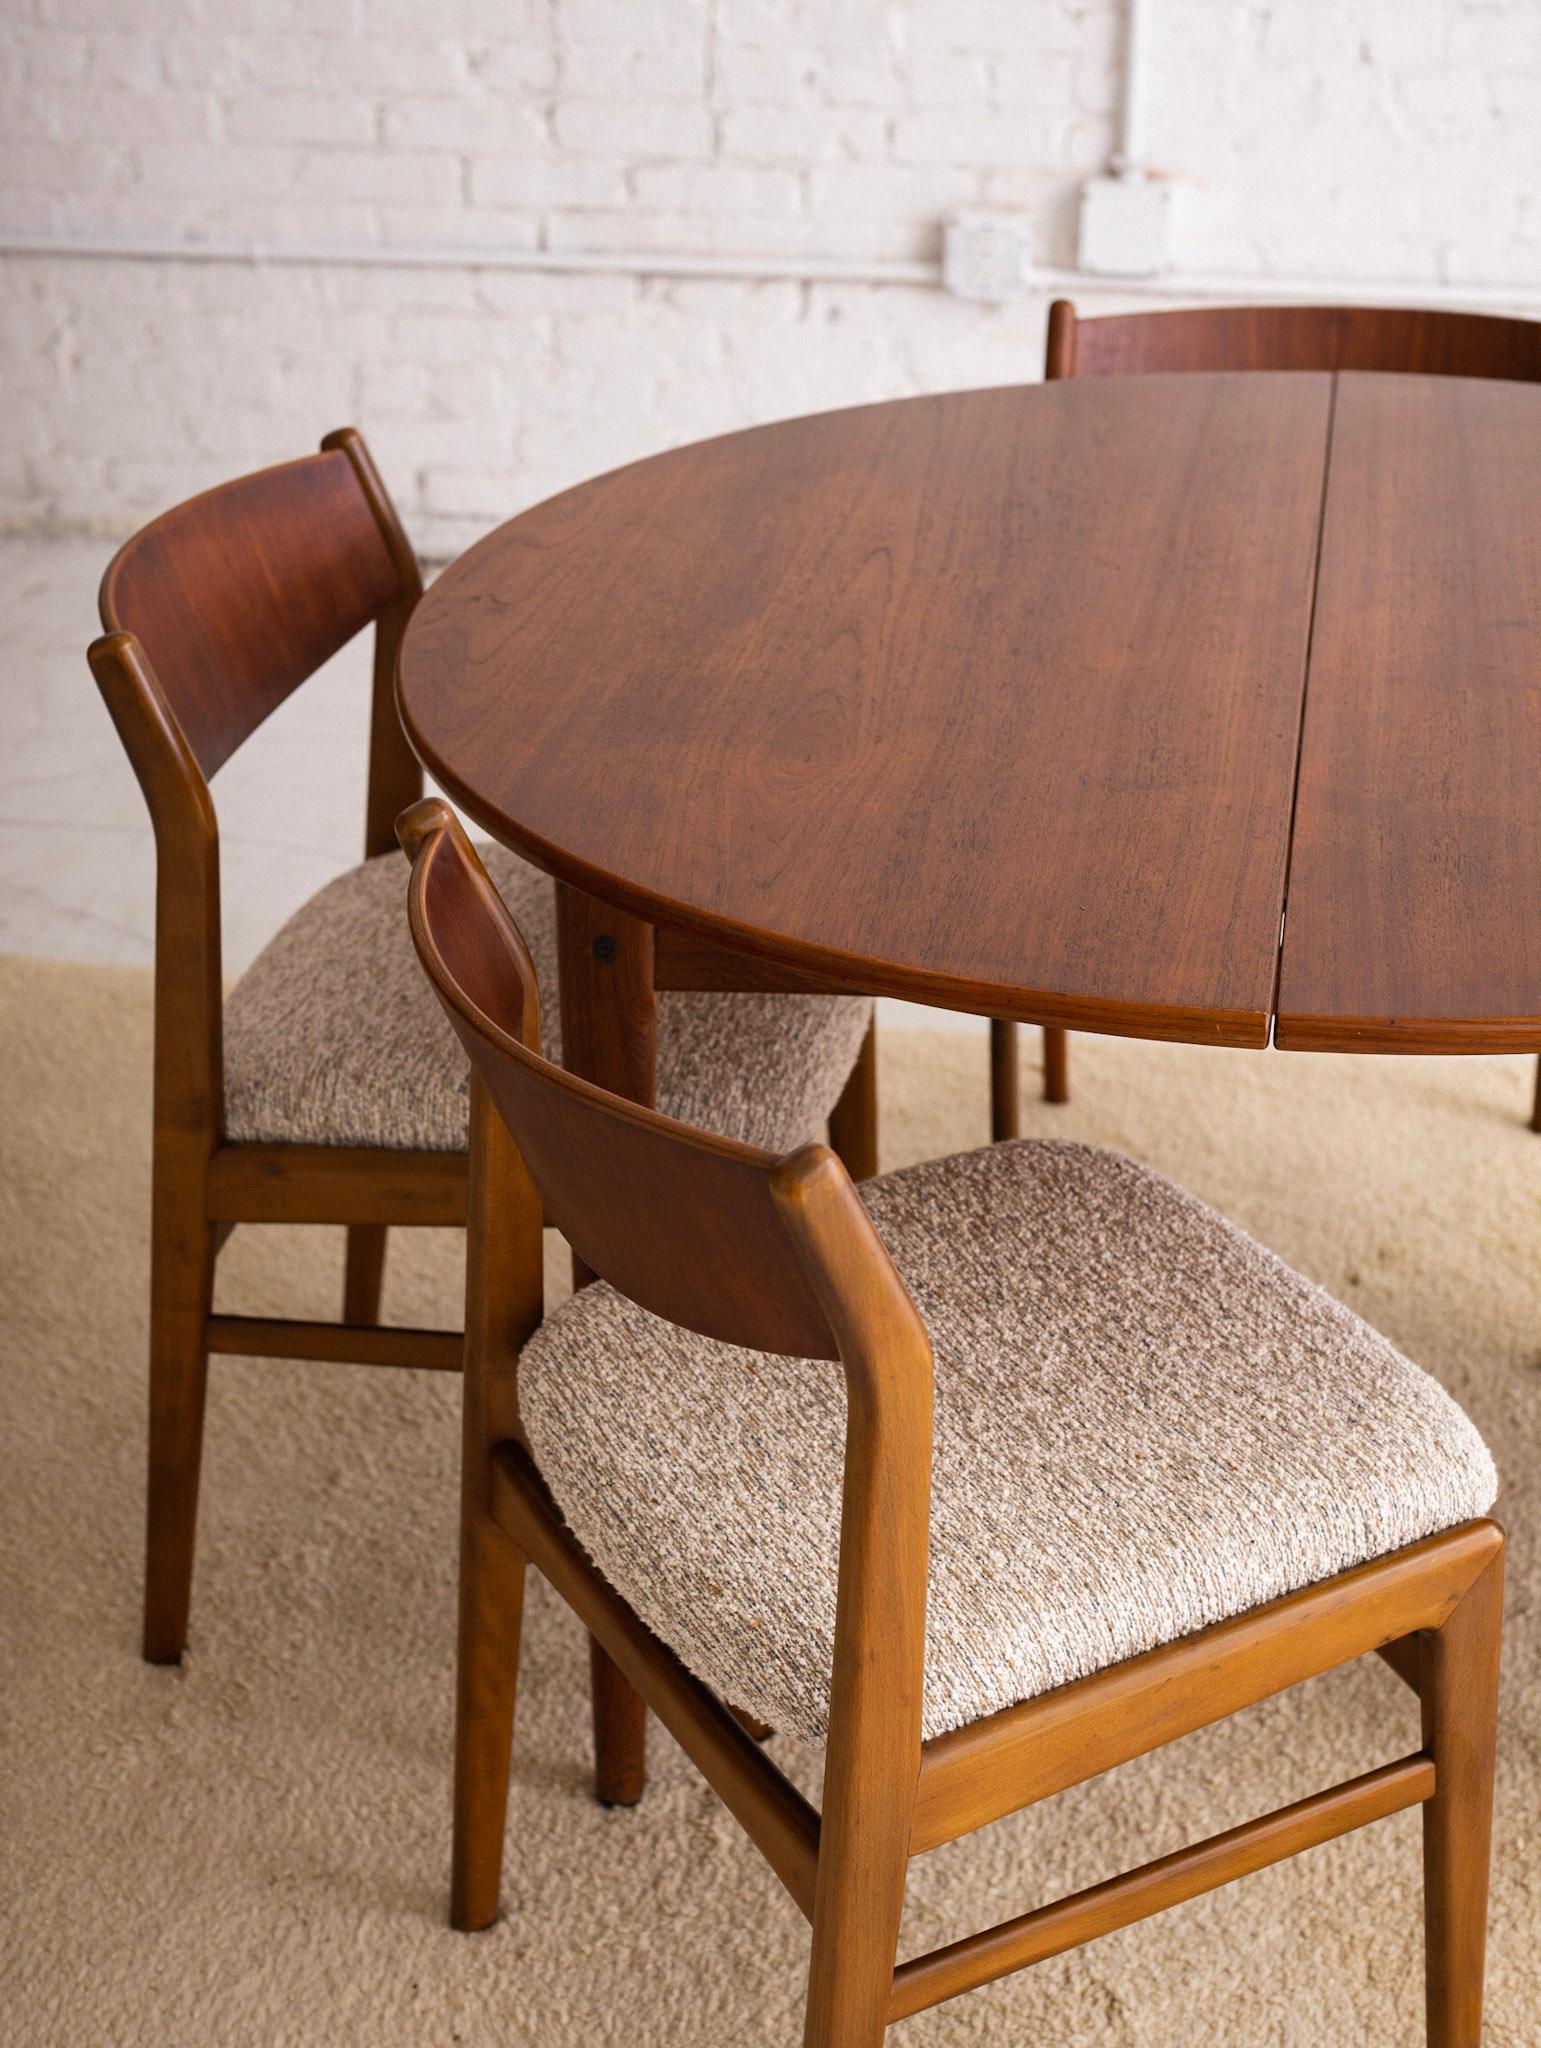 Mid-Century Modern Danish dining set with six chairs. Unrestored original finish. Chairs feature new textured beige, gray and blue upholstered seats. Comes with two leaves measuring 13.25” wide each. Table expands to a total of 75.5” wide.